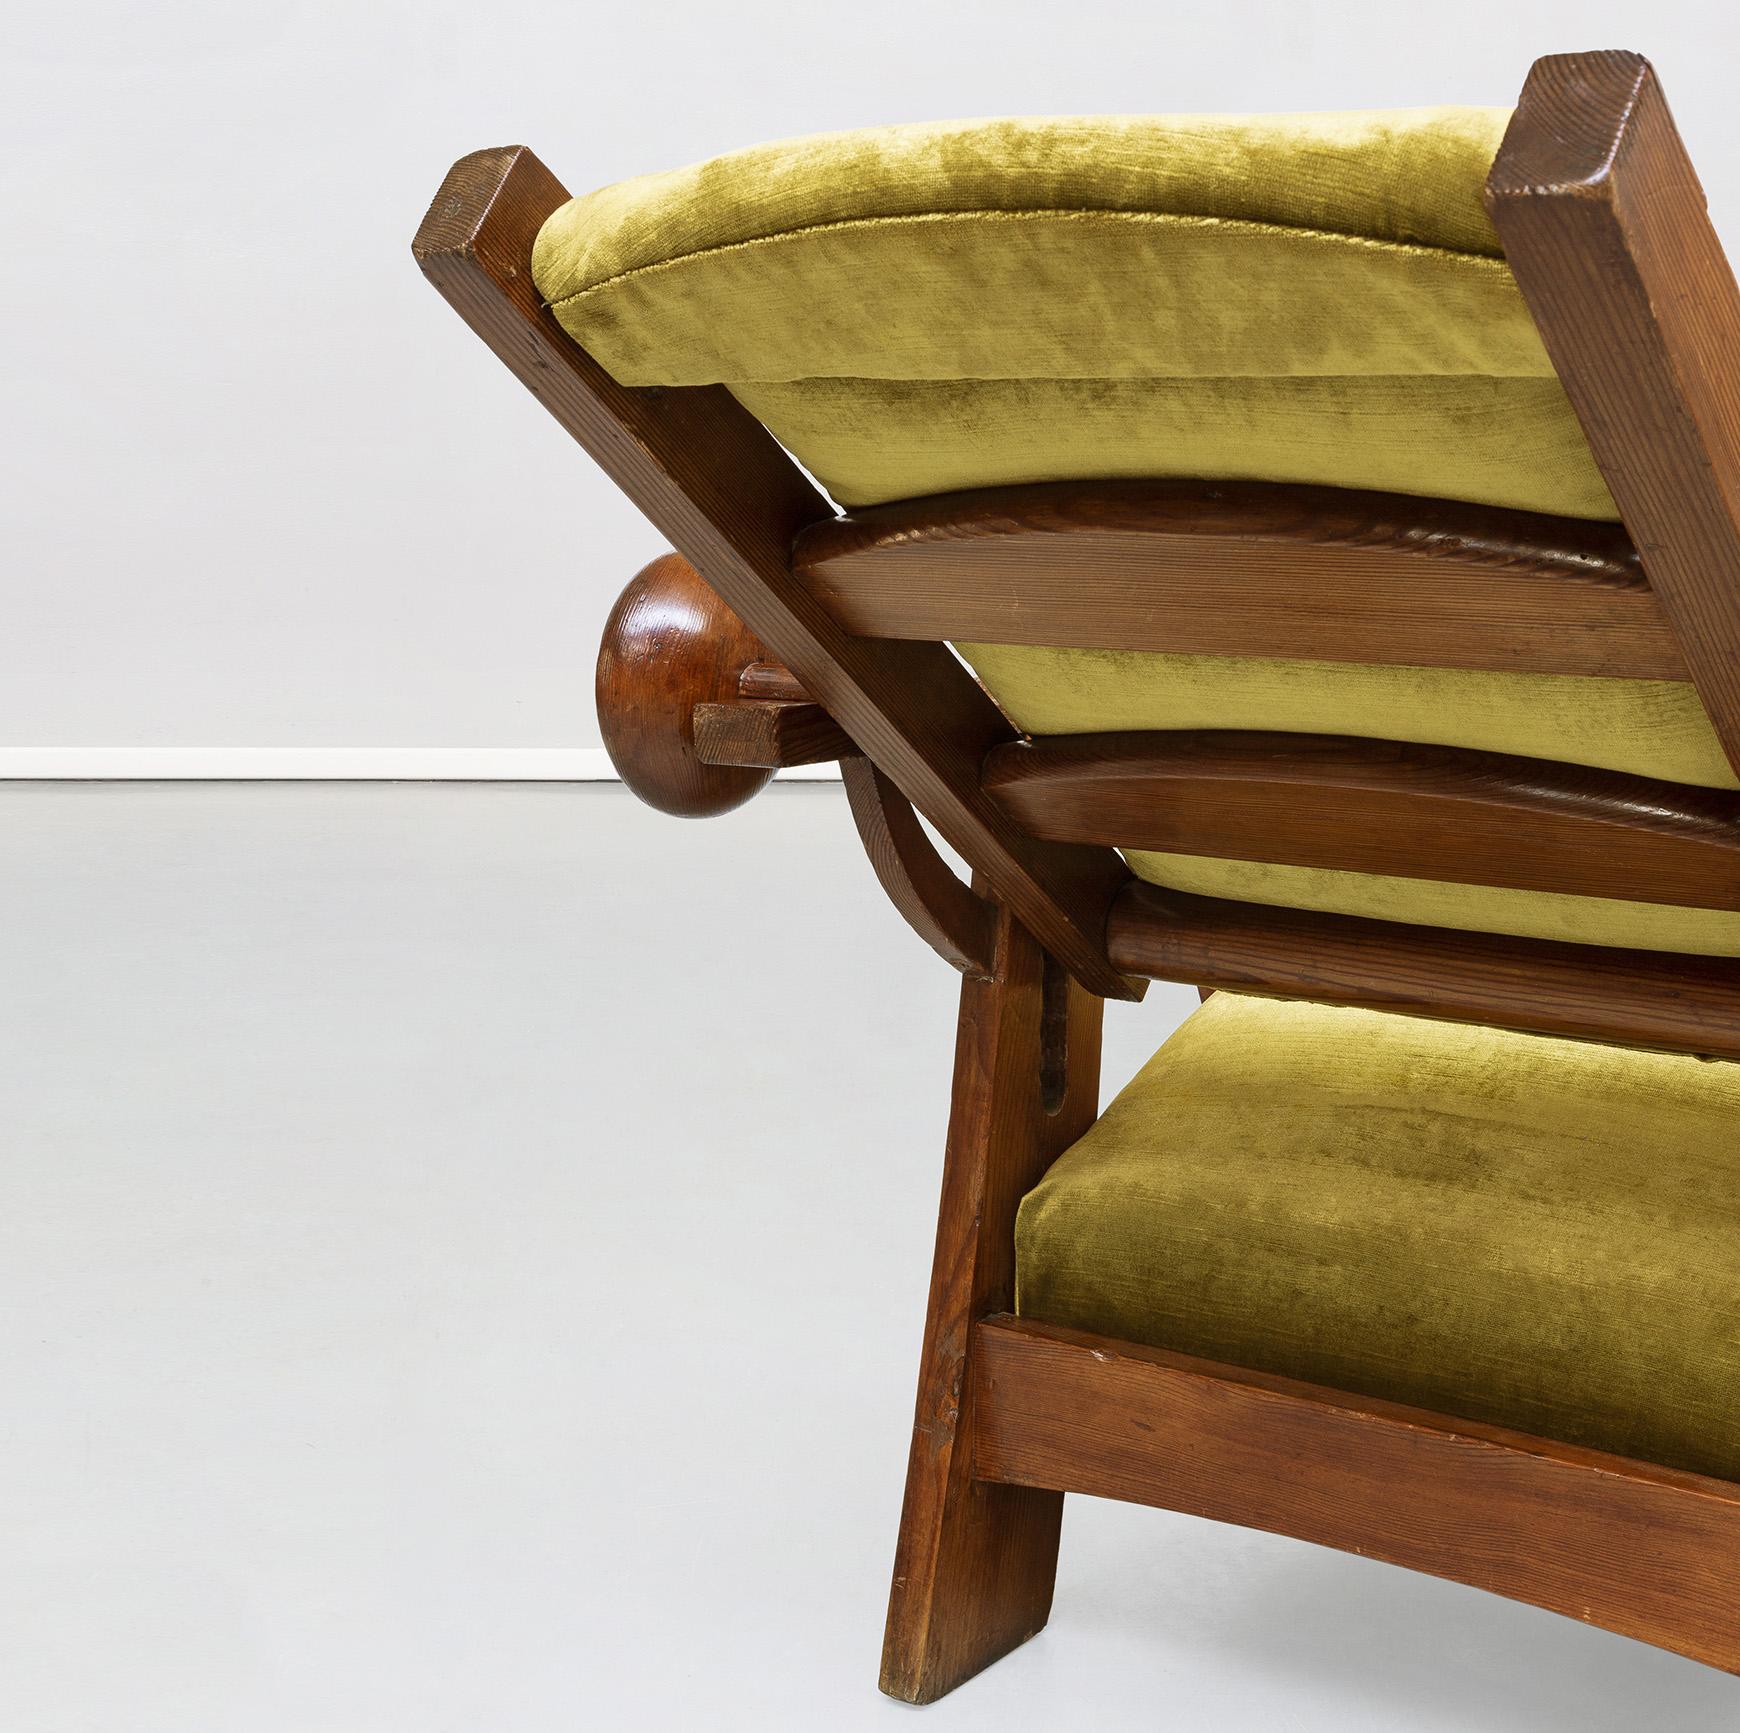 Golden Green Velvet Adjustable Armchairs in Pitch Pine Clemens Holzmeister, 1930 For Sale 7